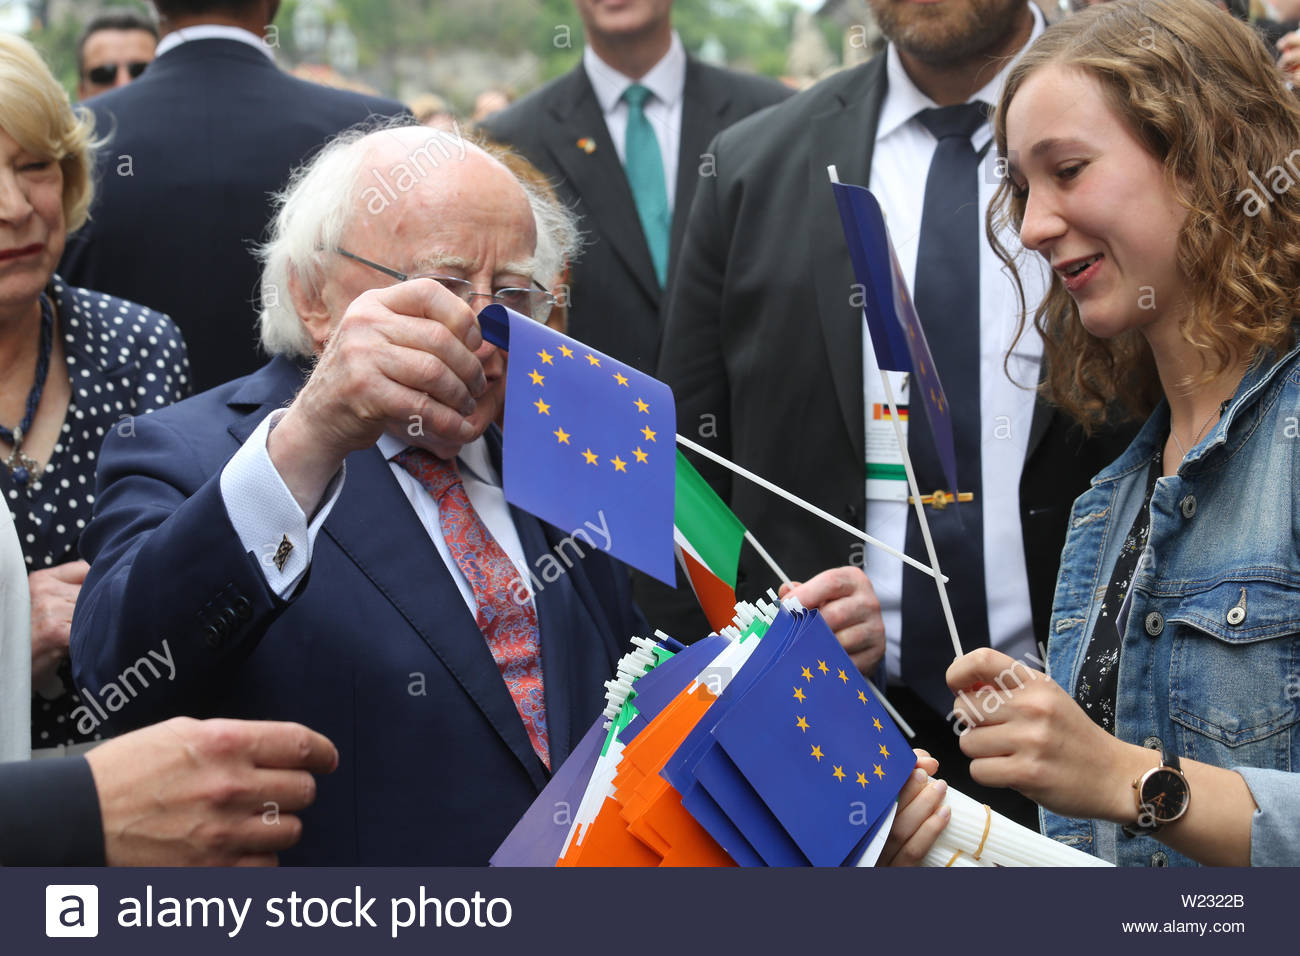 Würzburg, Germany. 05th July, 2019. Irish president Michael D Higgins picks an EU flag from a bunch offered to him by a well-wisher .He has visited Würzburg in Bavaria today on the last leg of his diplomatic trip to Germany. Earlier in the week he met Angela Merkel and German President Frank Steinmeier. President Higgins stopped at the university library this afternoon to view treasures of Irish literature and art, in particular the work of the famous German philospher, linguist and Latin scholar Casper Zeuss whose book Grammatica Celtica first documented the grammar of the Irish language. Stock Photo